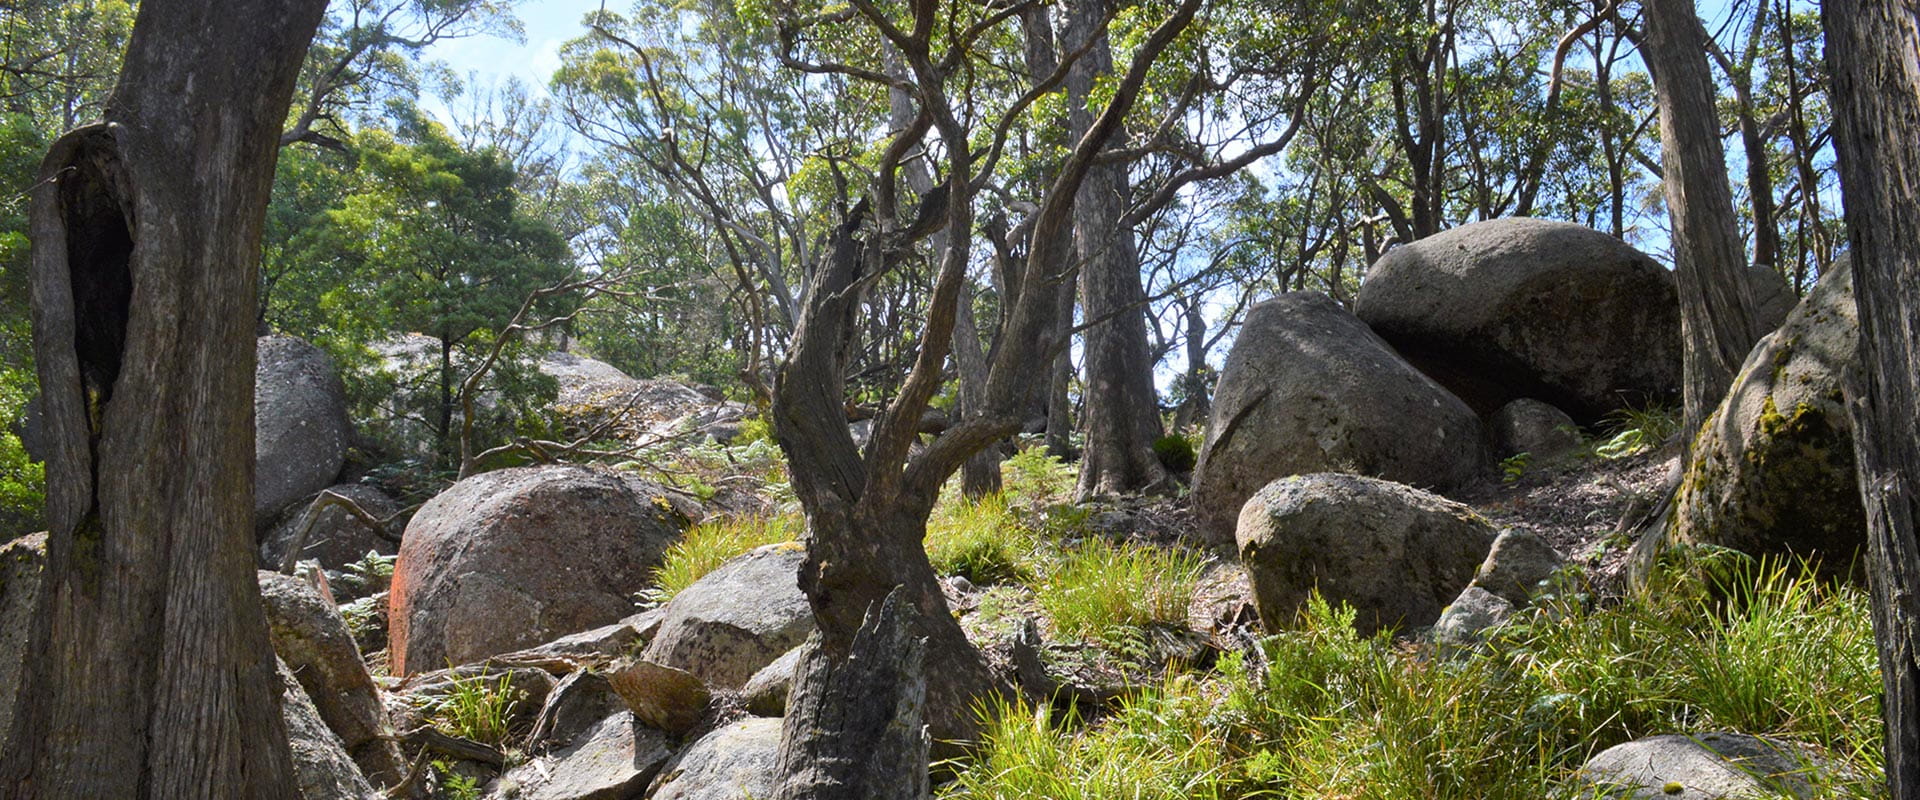 A rugged bushland with large boulders and trees